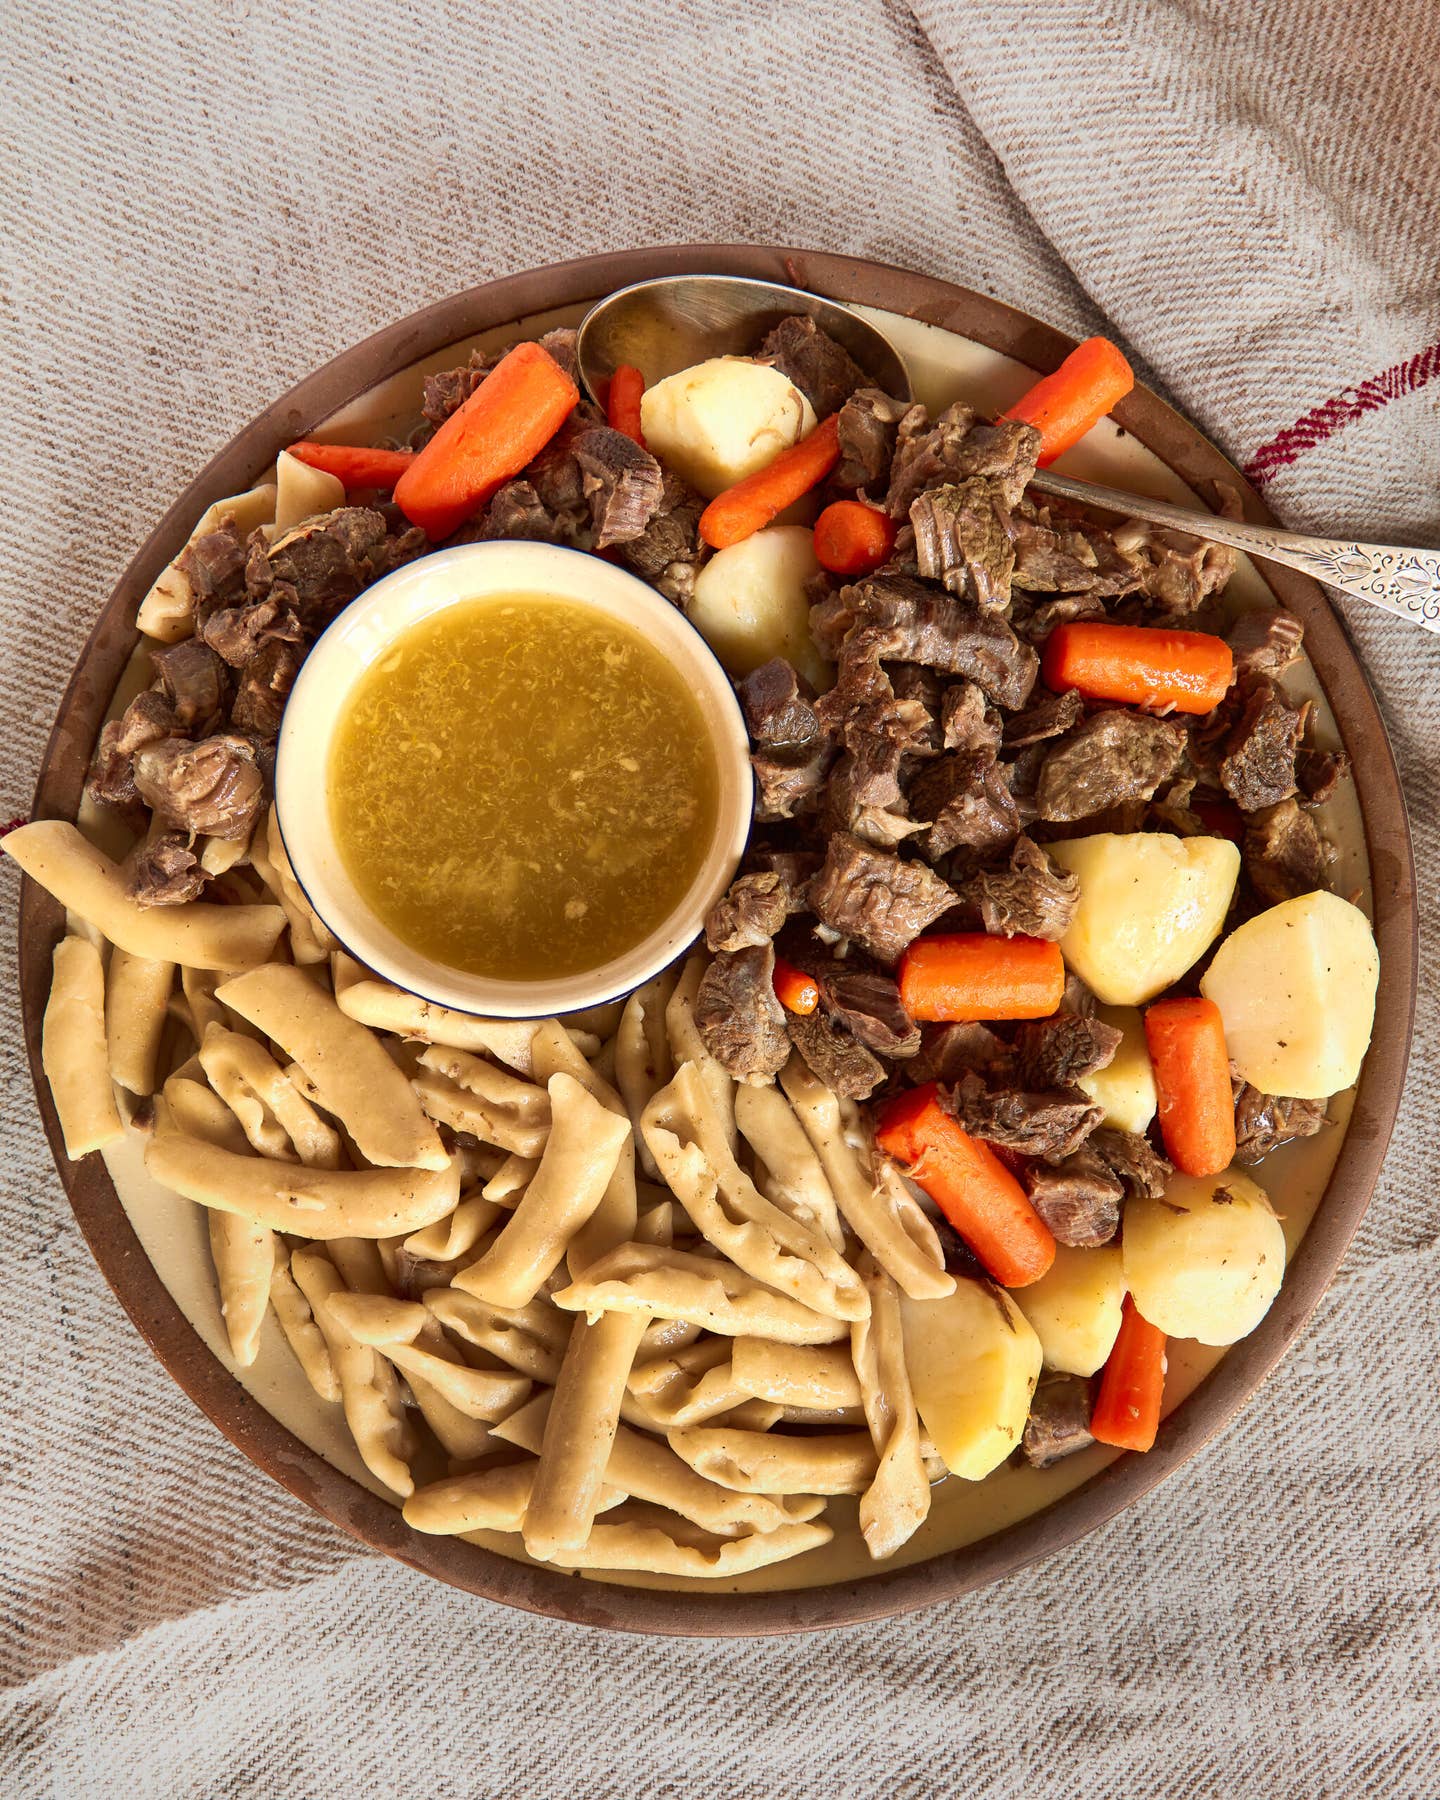 Beefy Chechen Noodles Should Be Your Next Weekend Cooking Project